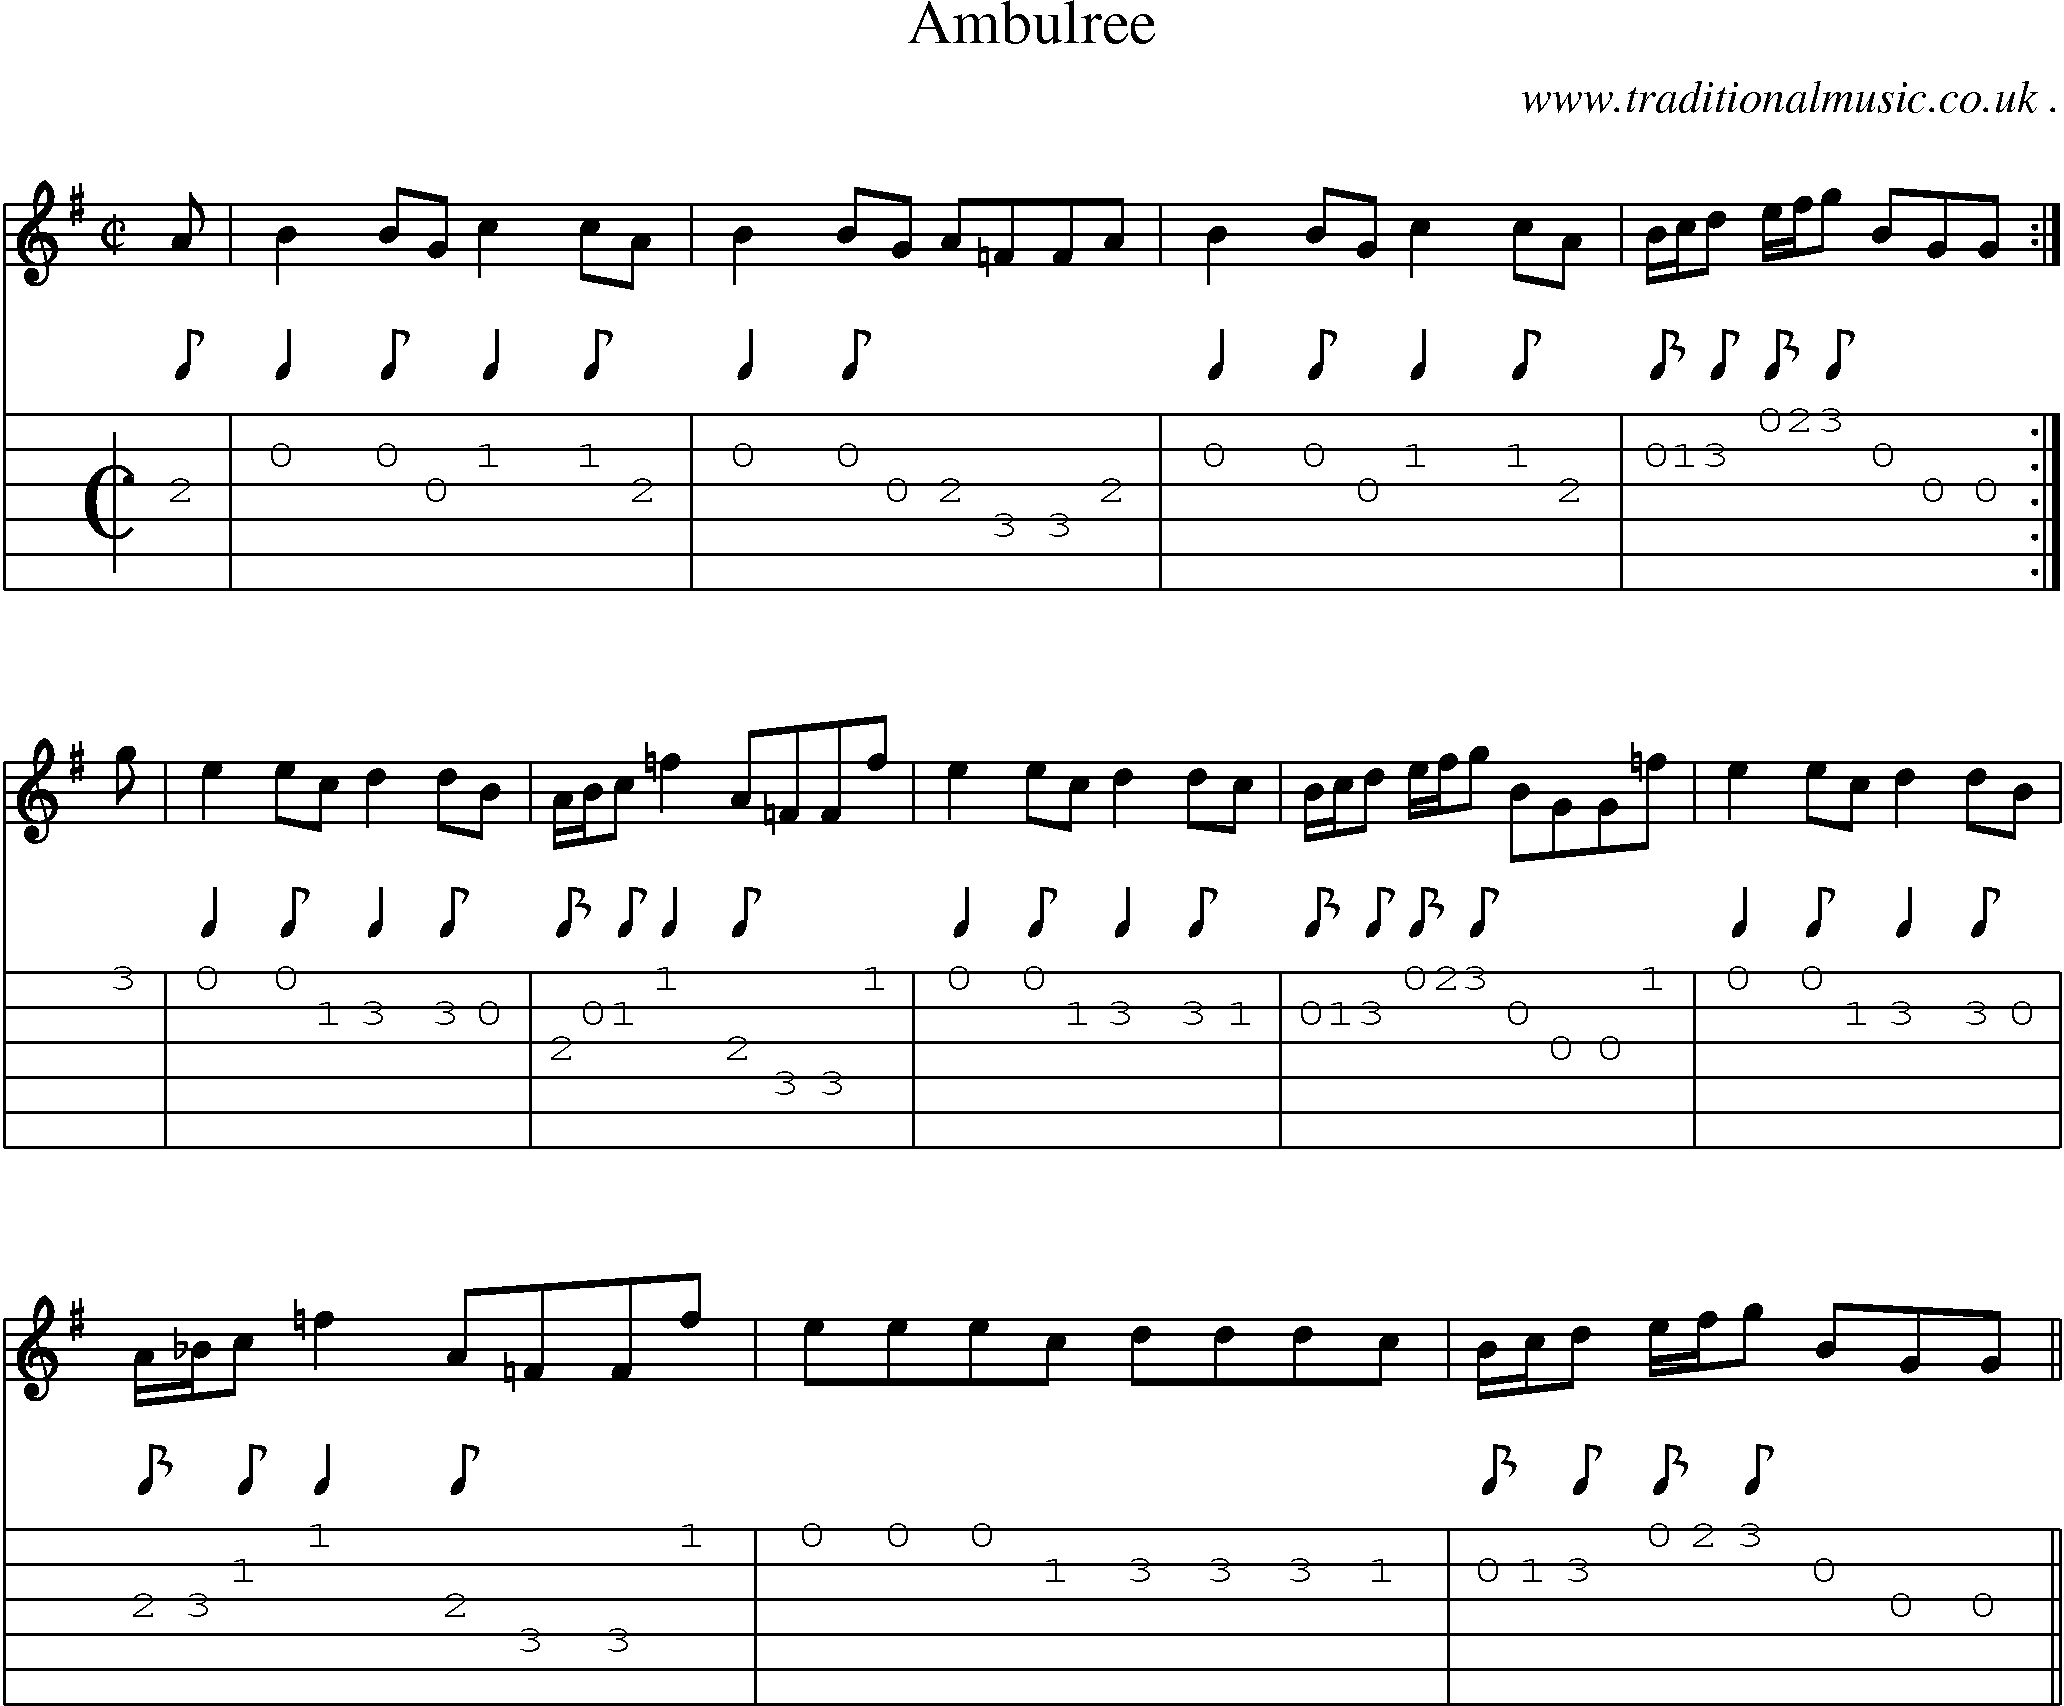 Sheet-music  score, Chords and Guitar Tabs for Ambulree